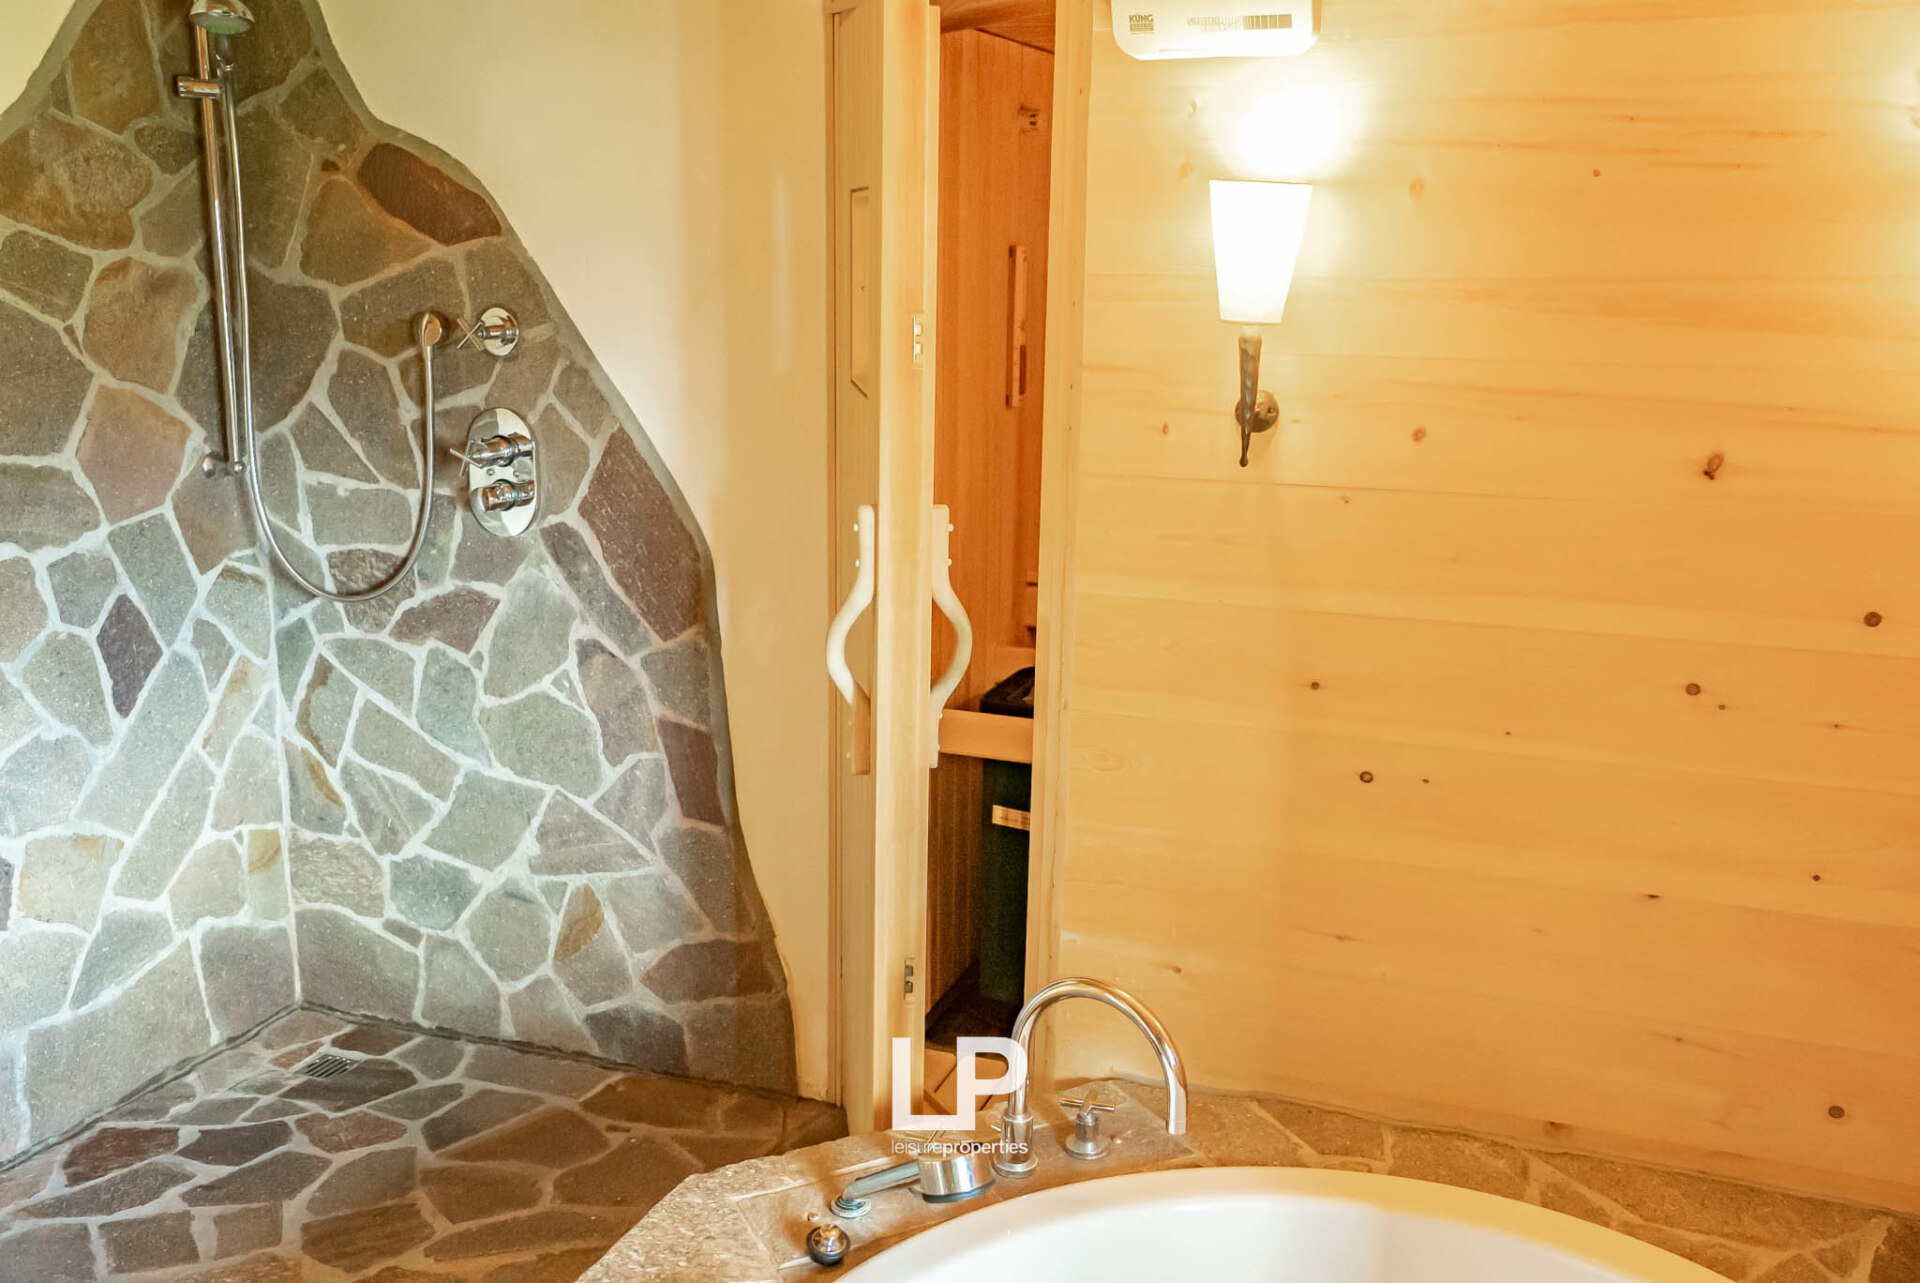 We consider the spa the jewel on the crown; enjoy quality time in the sauna. A deep bath could be used as a cold bath or a relaxing bath with warm water.